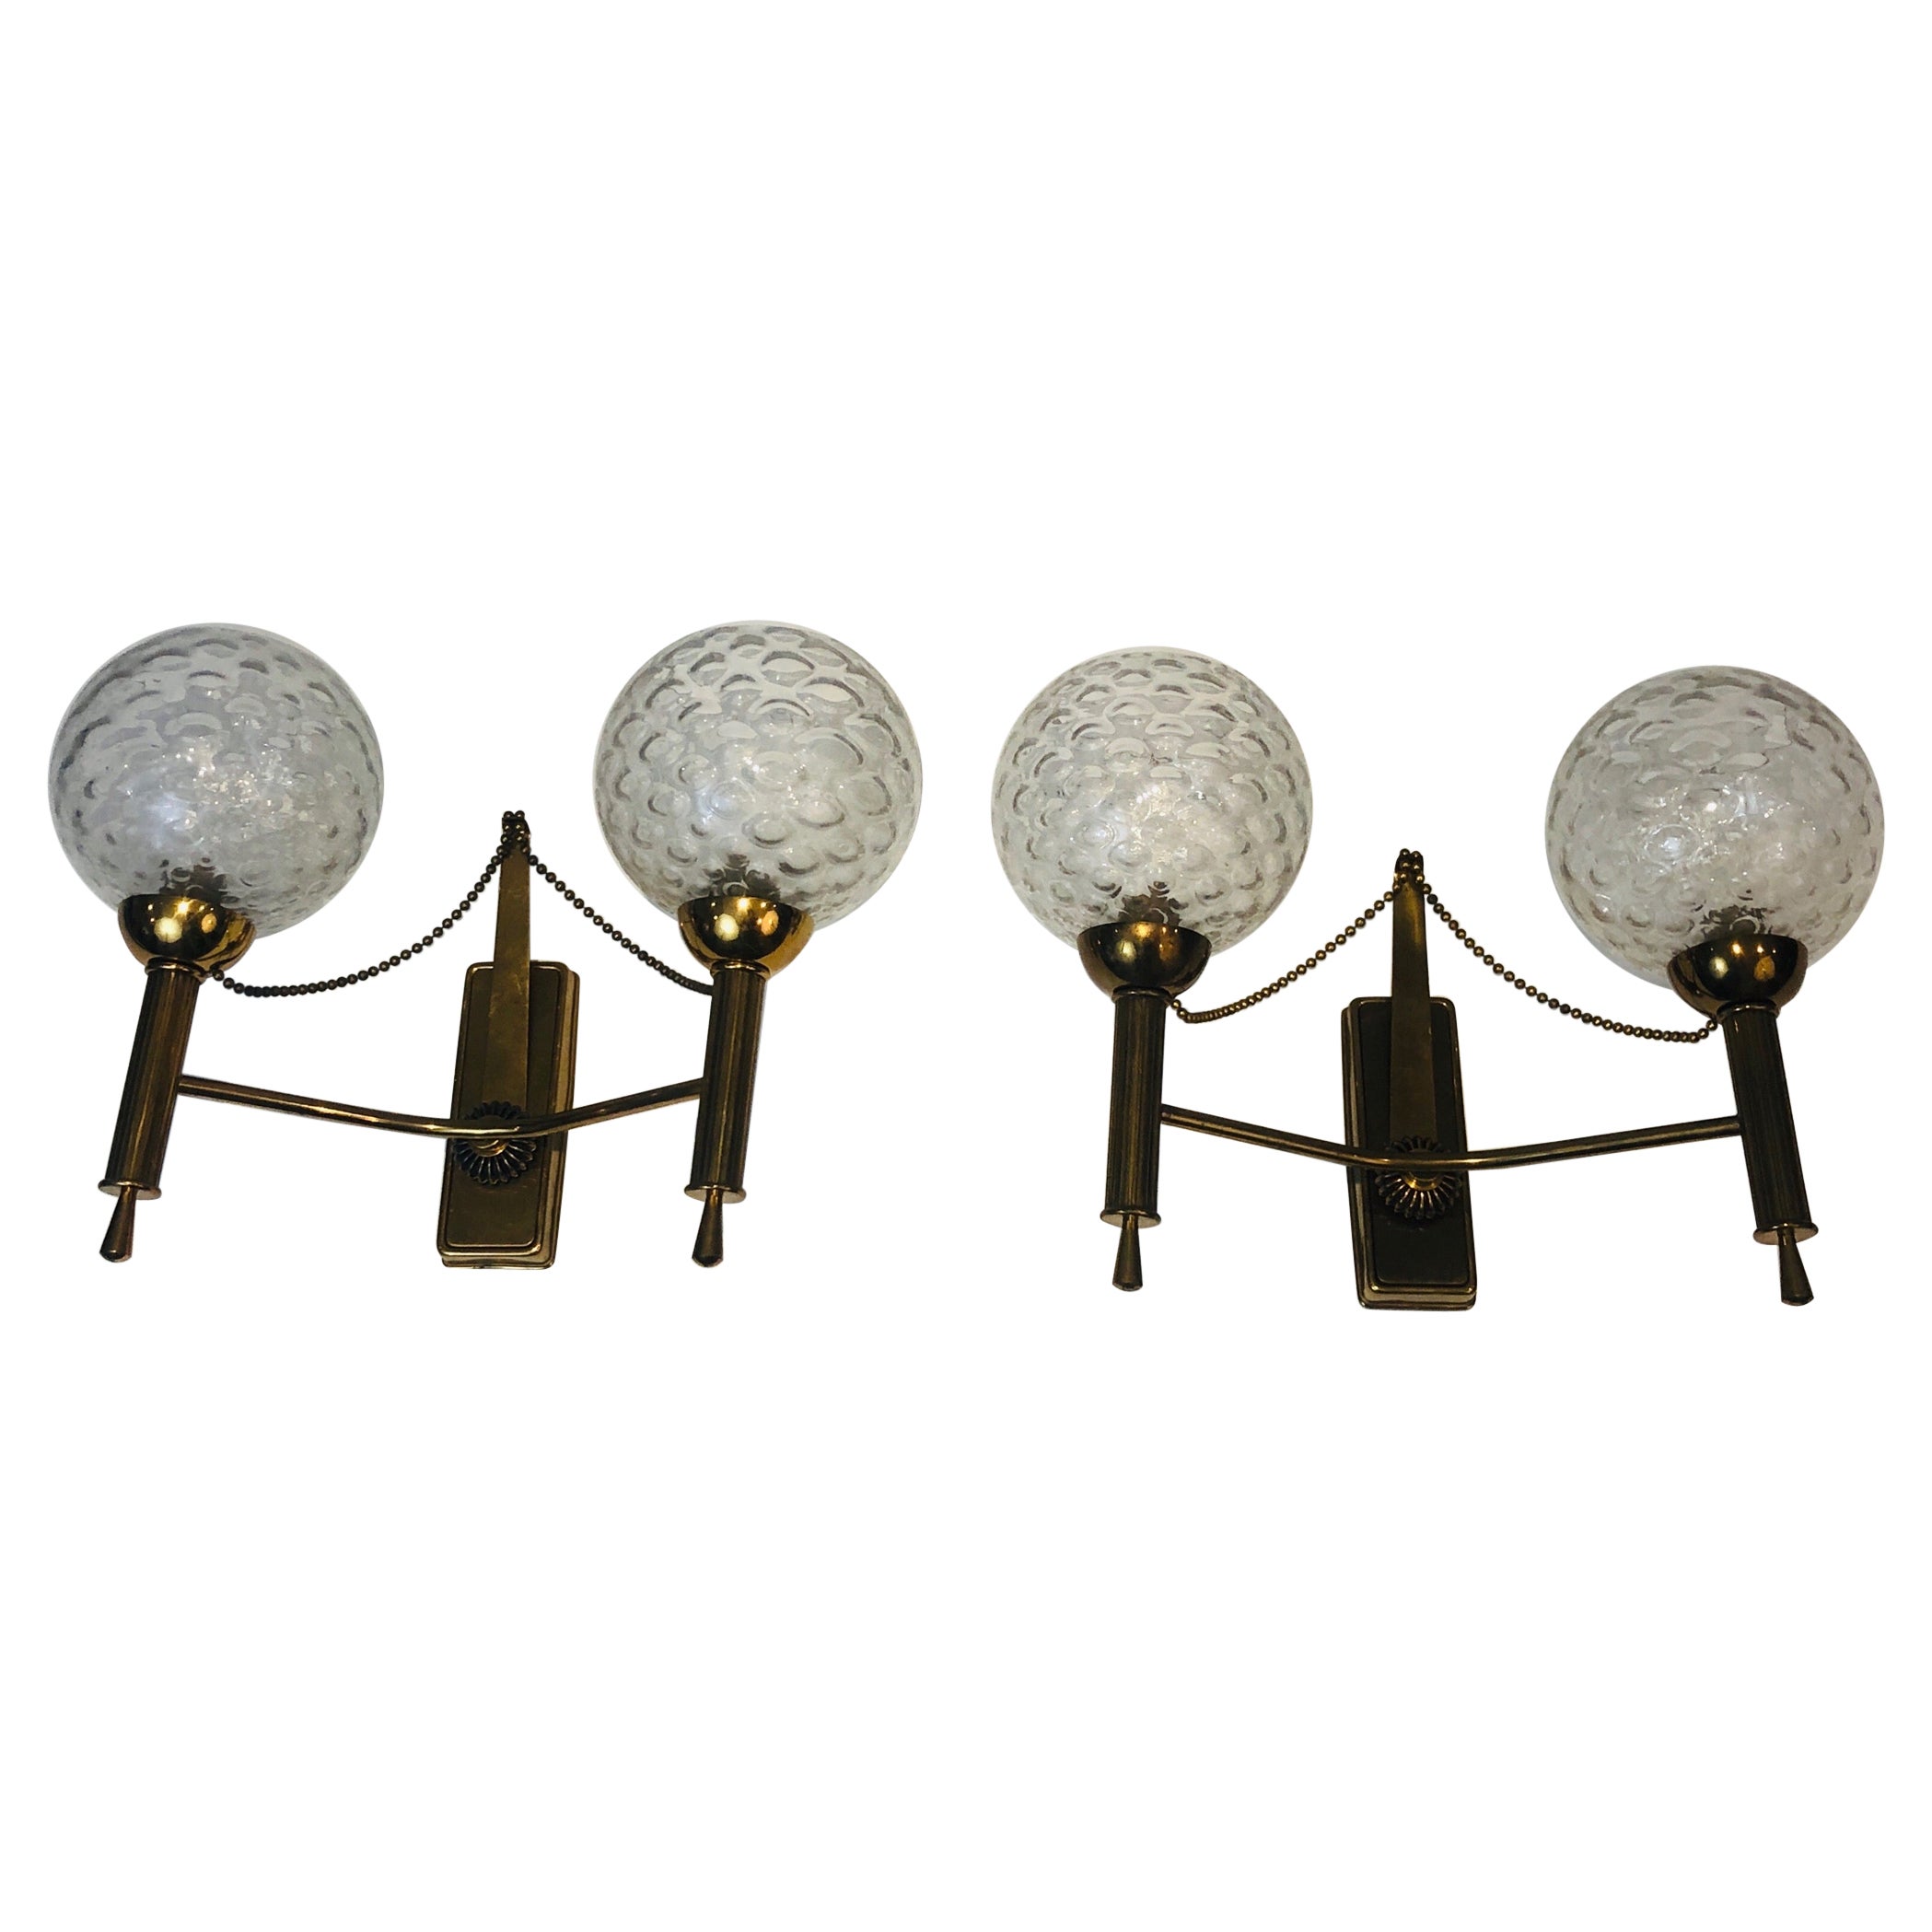 Pair of Brass and Glass Bowls Wall Sconces, French Work, Circa 1970